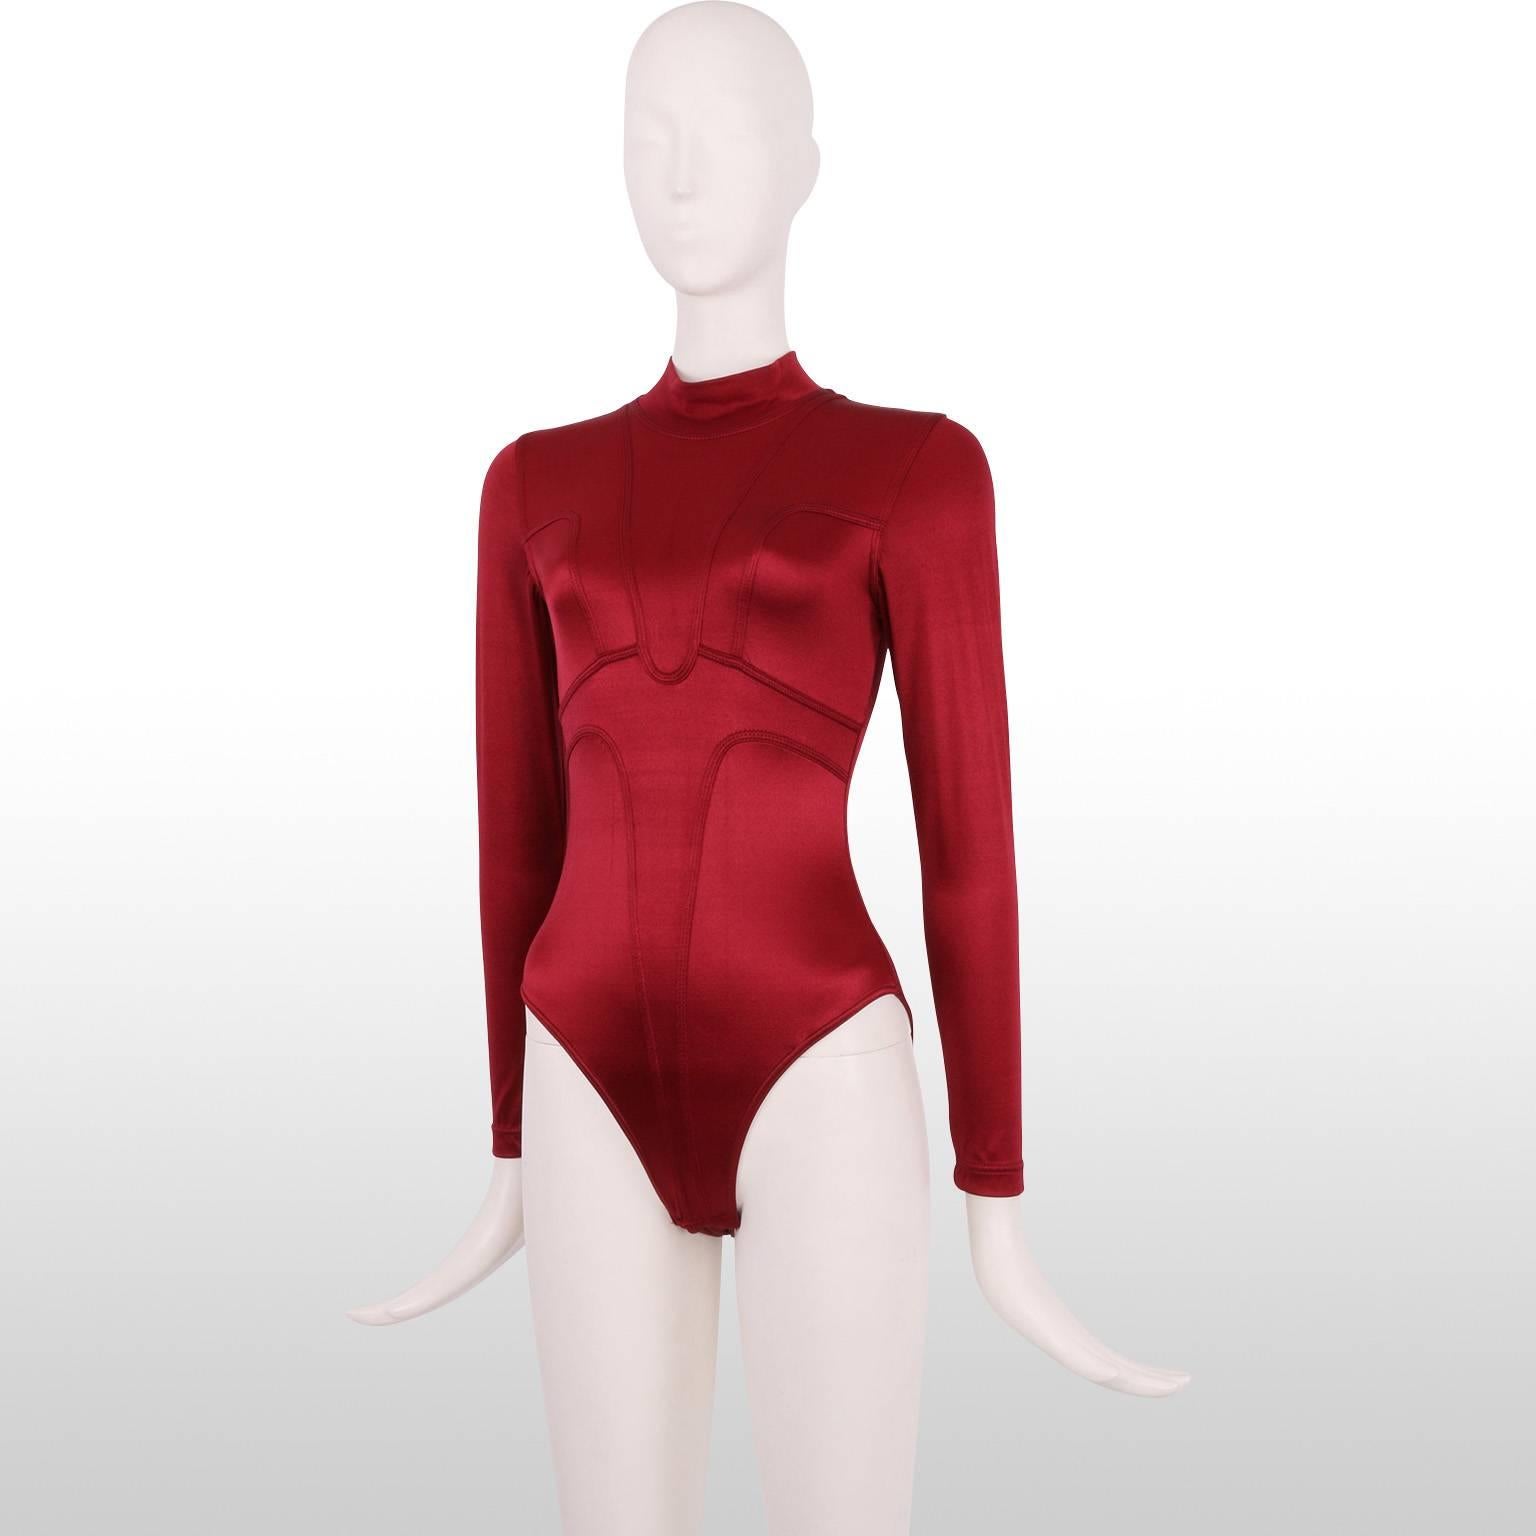 1980s Chrissie Walsh Ruby Red Metallic Body Suit In Excellent Condition For Sale In London, GB